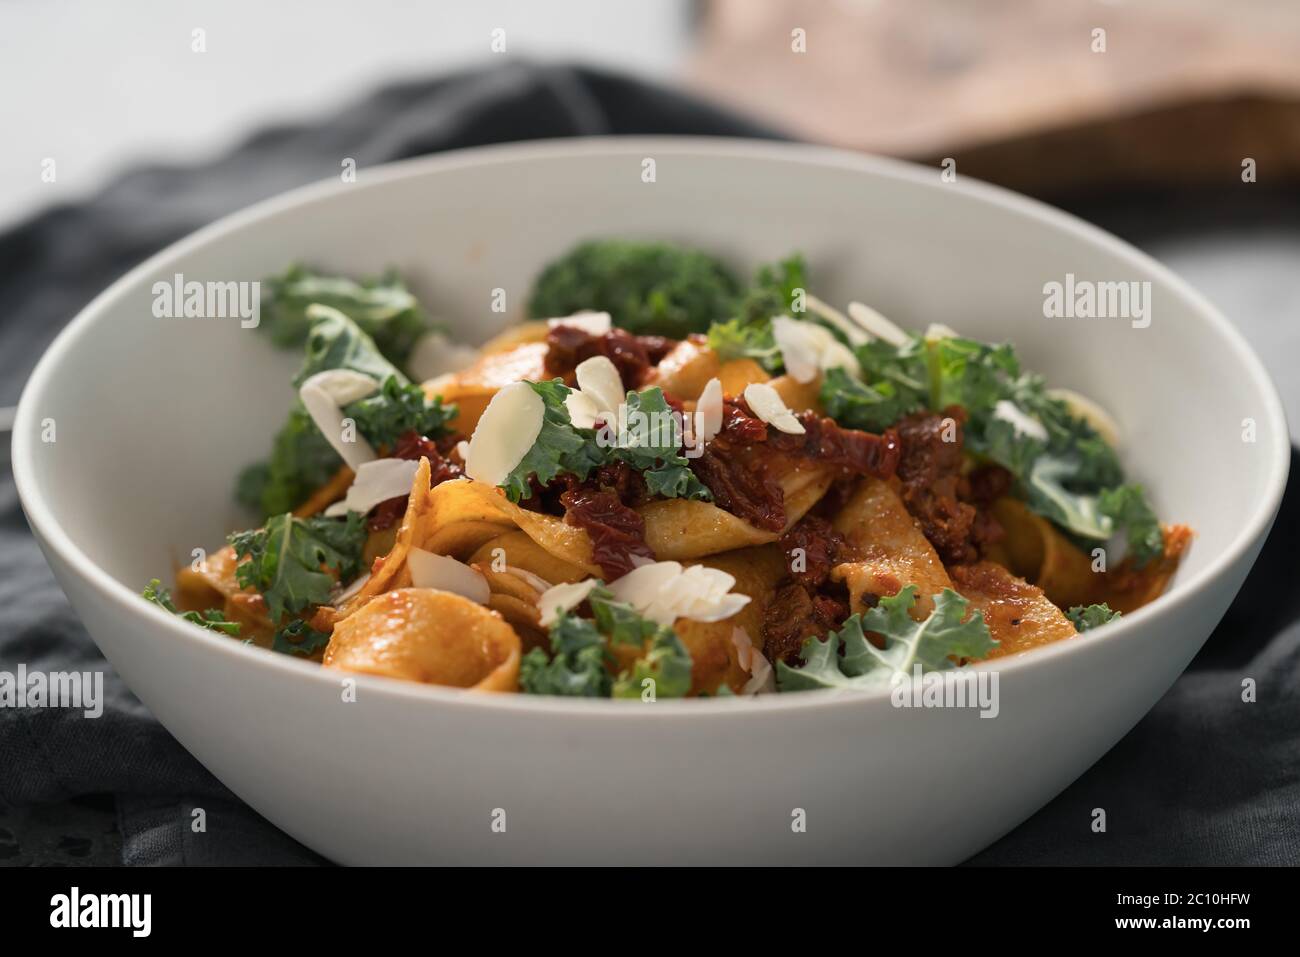 fettuccine pasta with sun-dried tomatoes, almond flakes and kale leaves Stock Photo